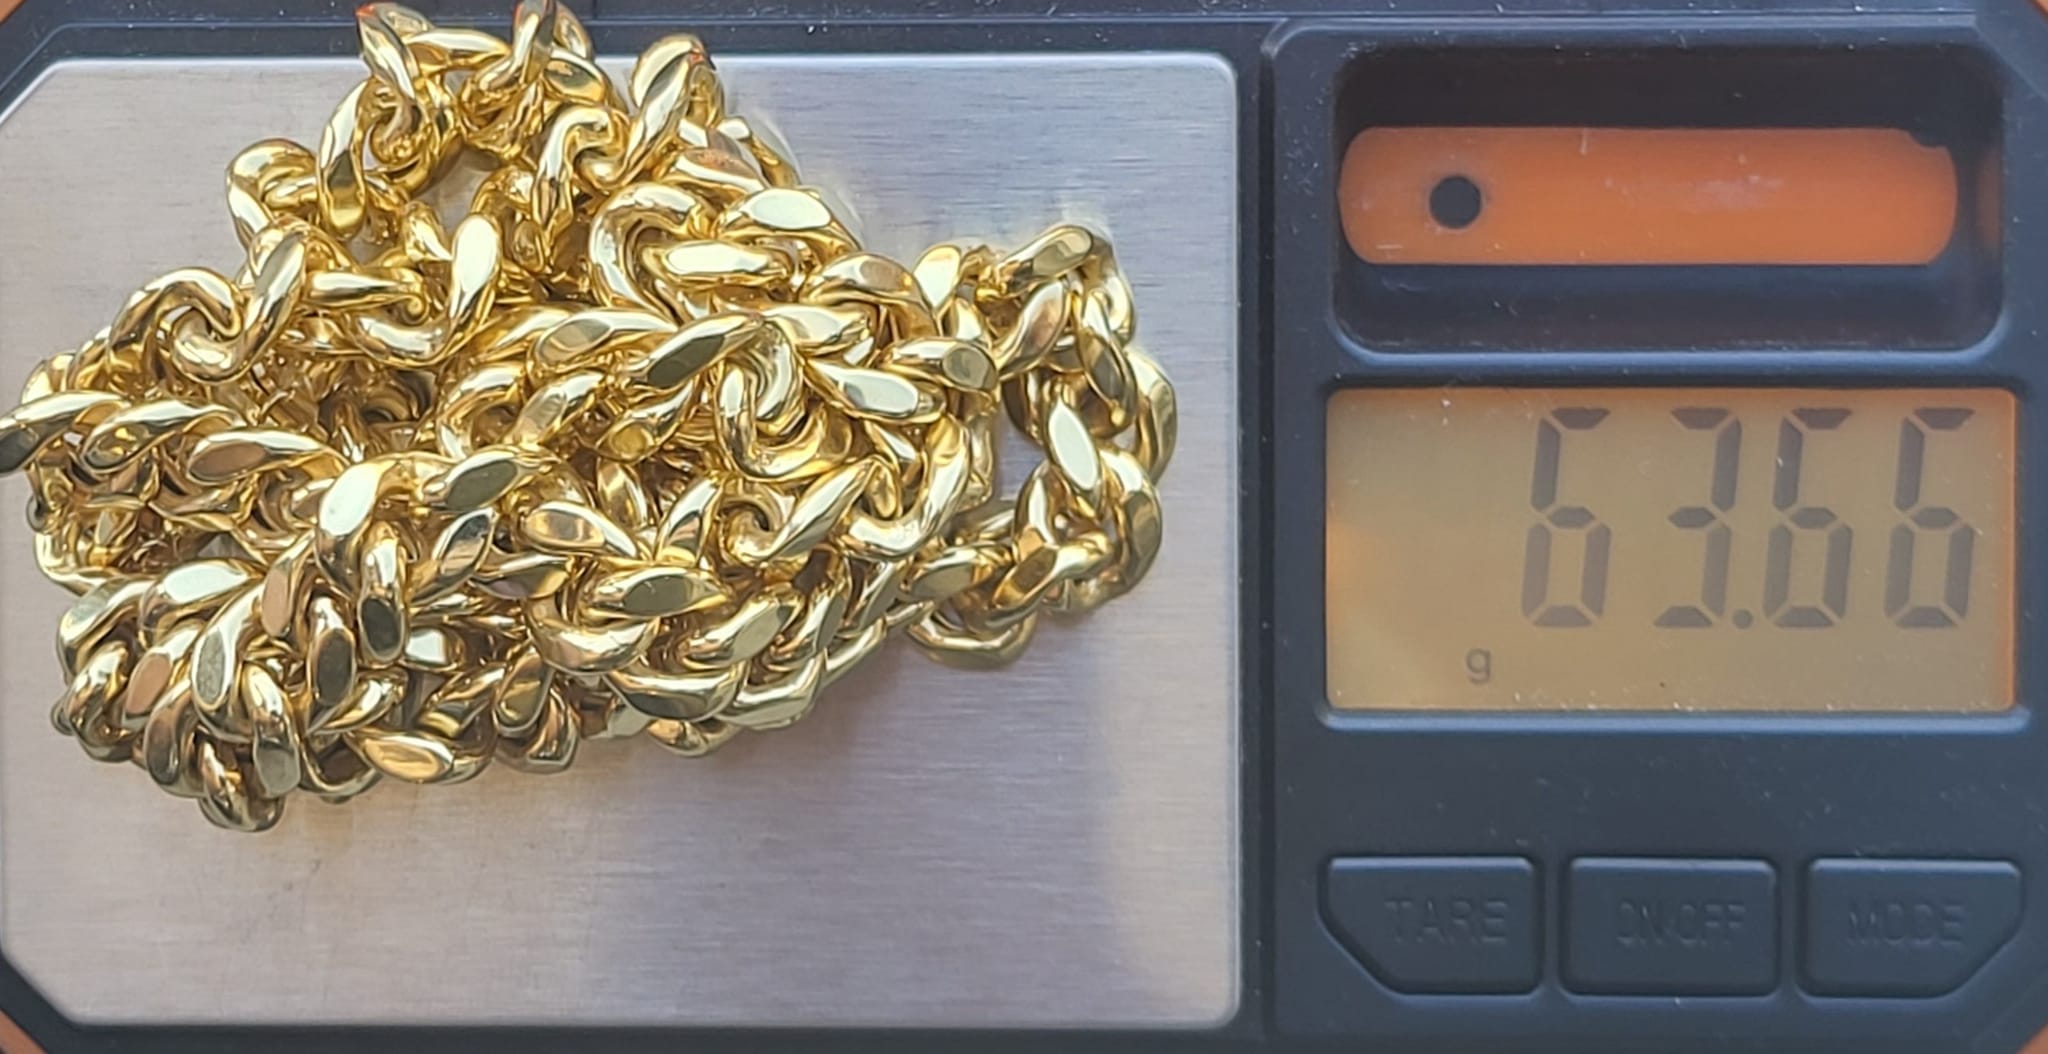 Axel Pawn Shop Announced They Have a Program to Test Gold and Precious Metals